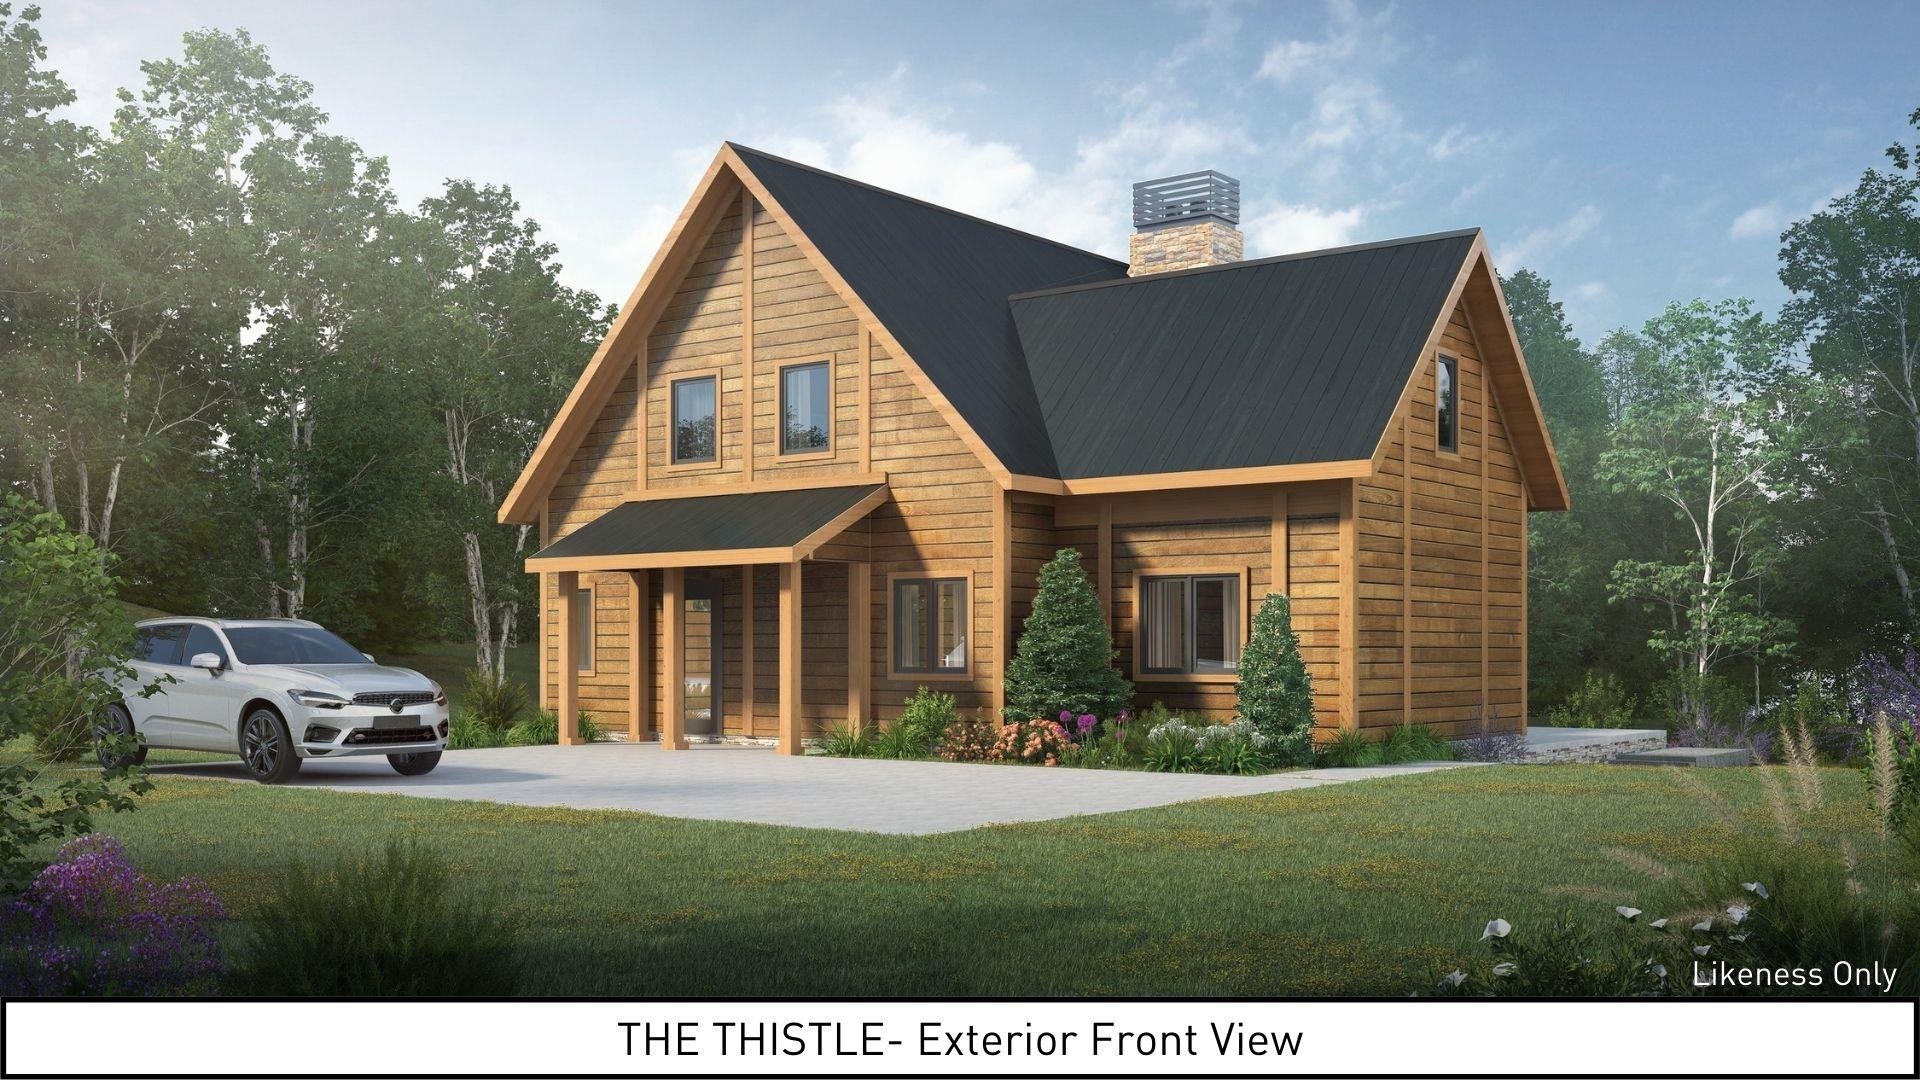 Thistle Exterior Front View